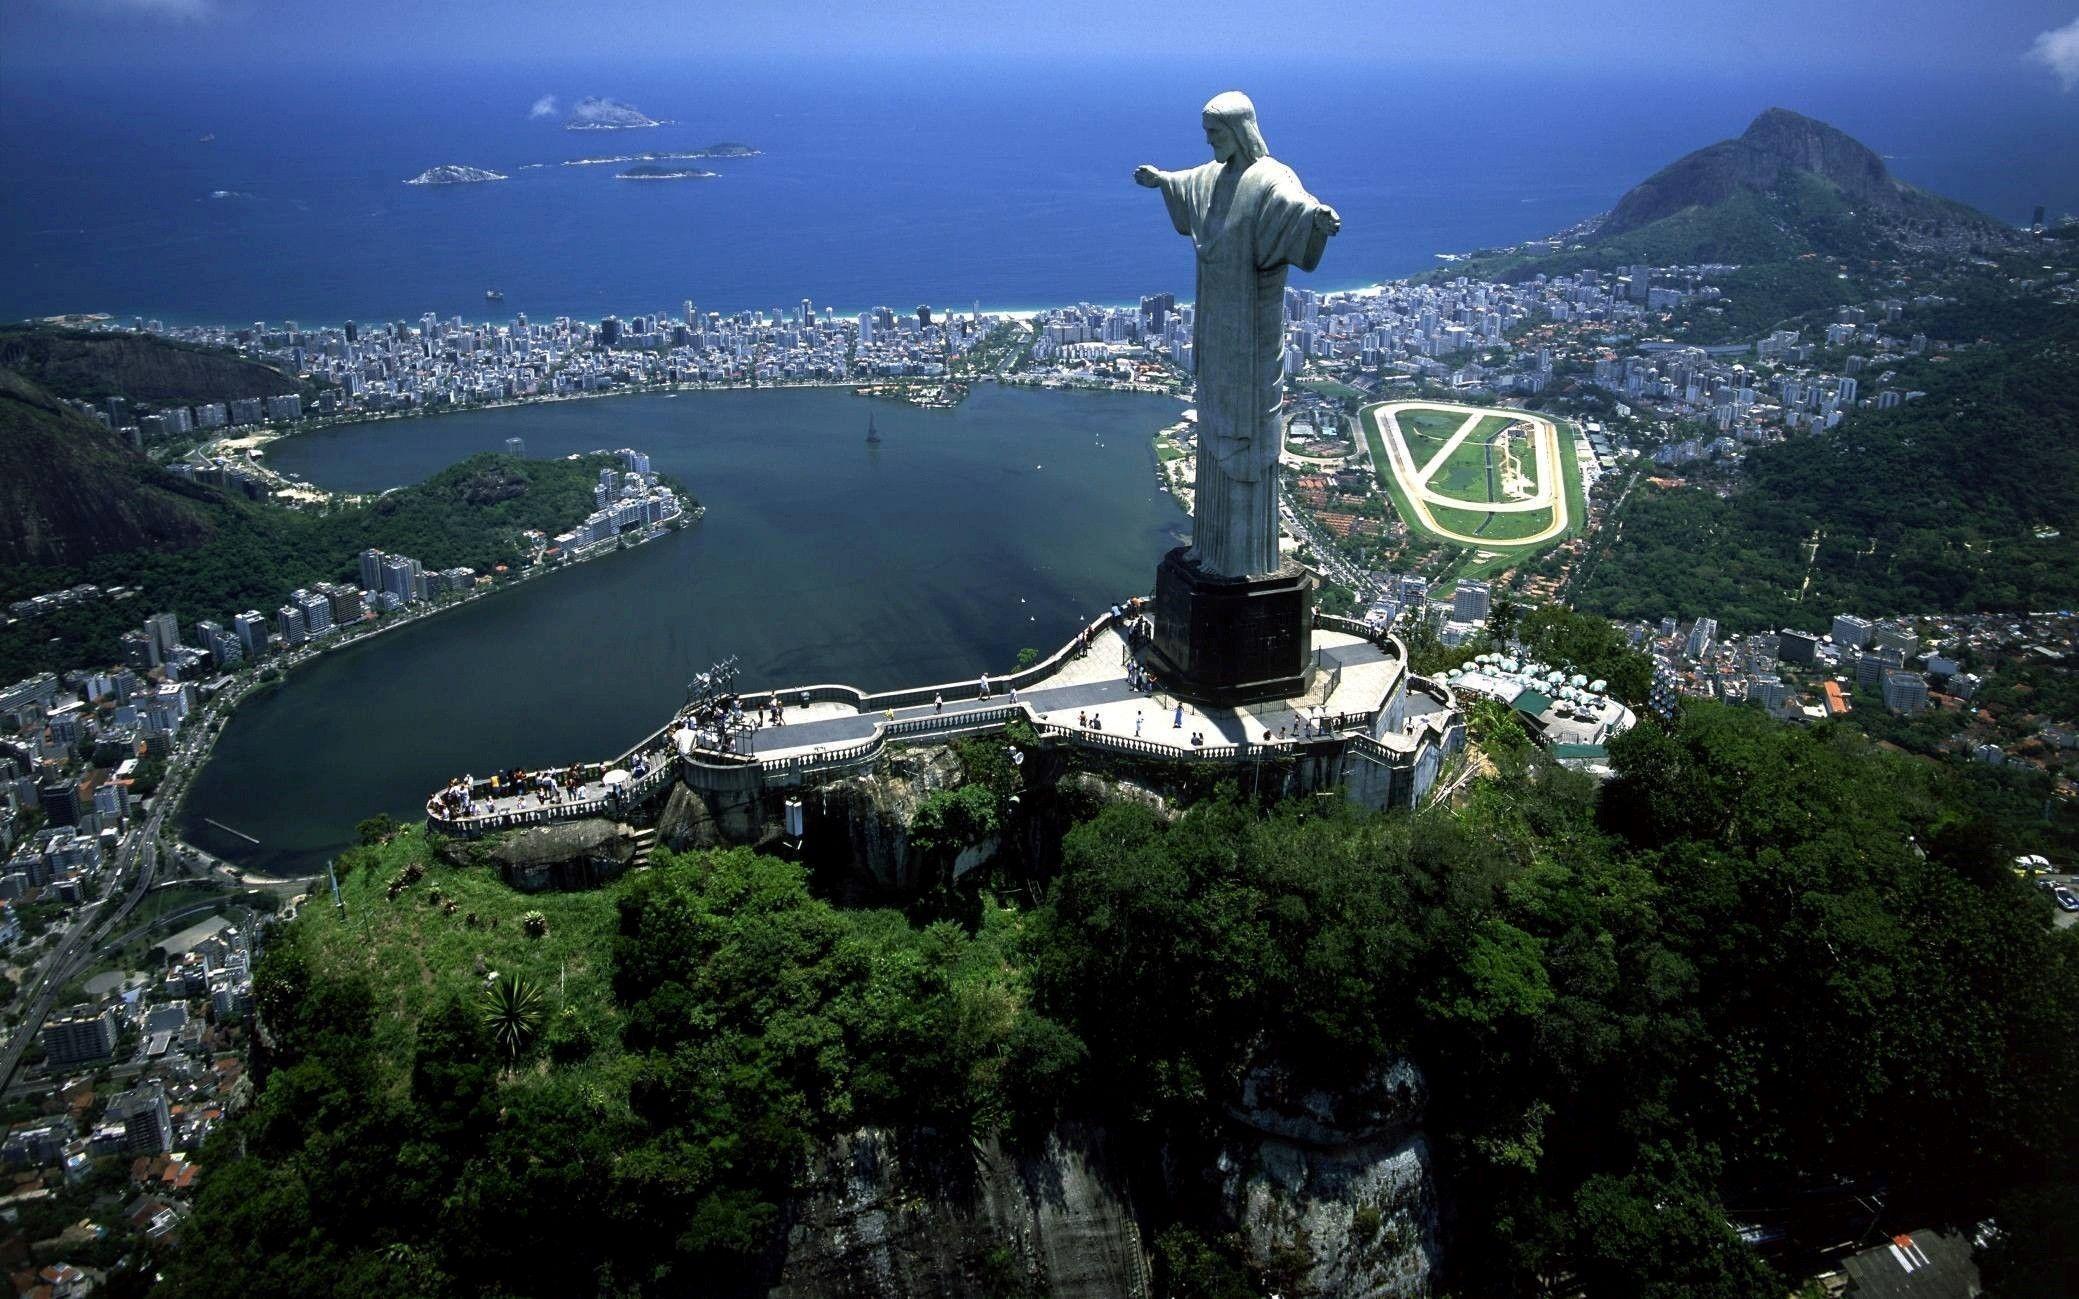 Brazil HD Wallpaper Image Picture Photo Download Page 0